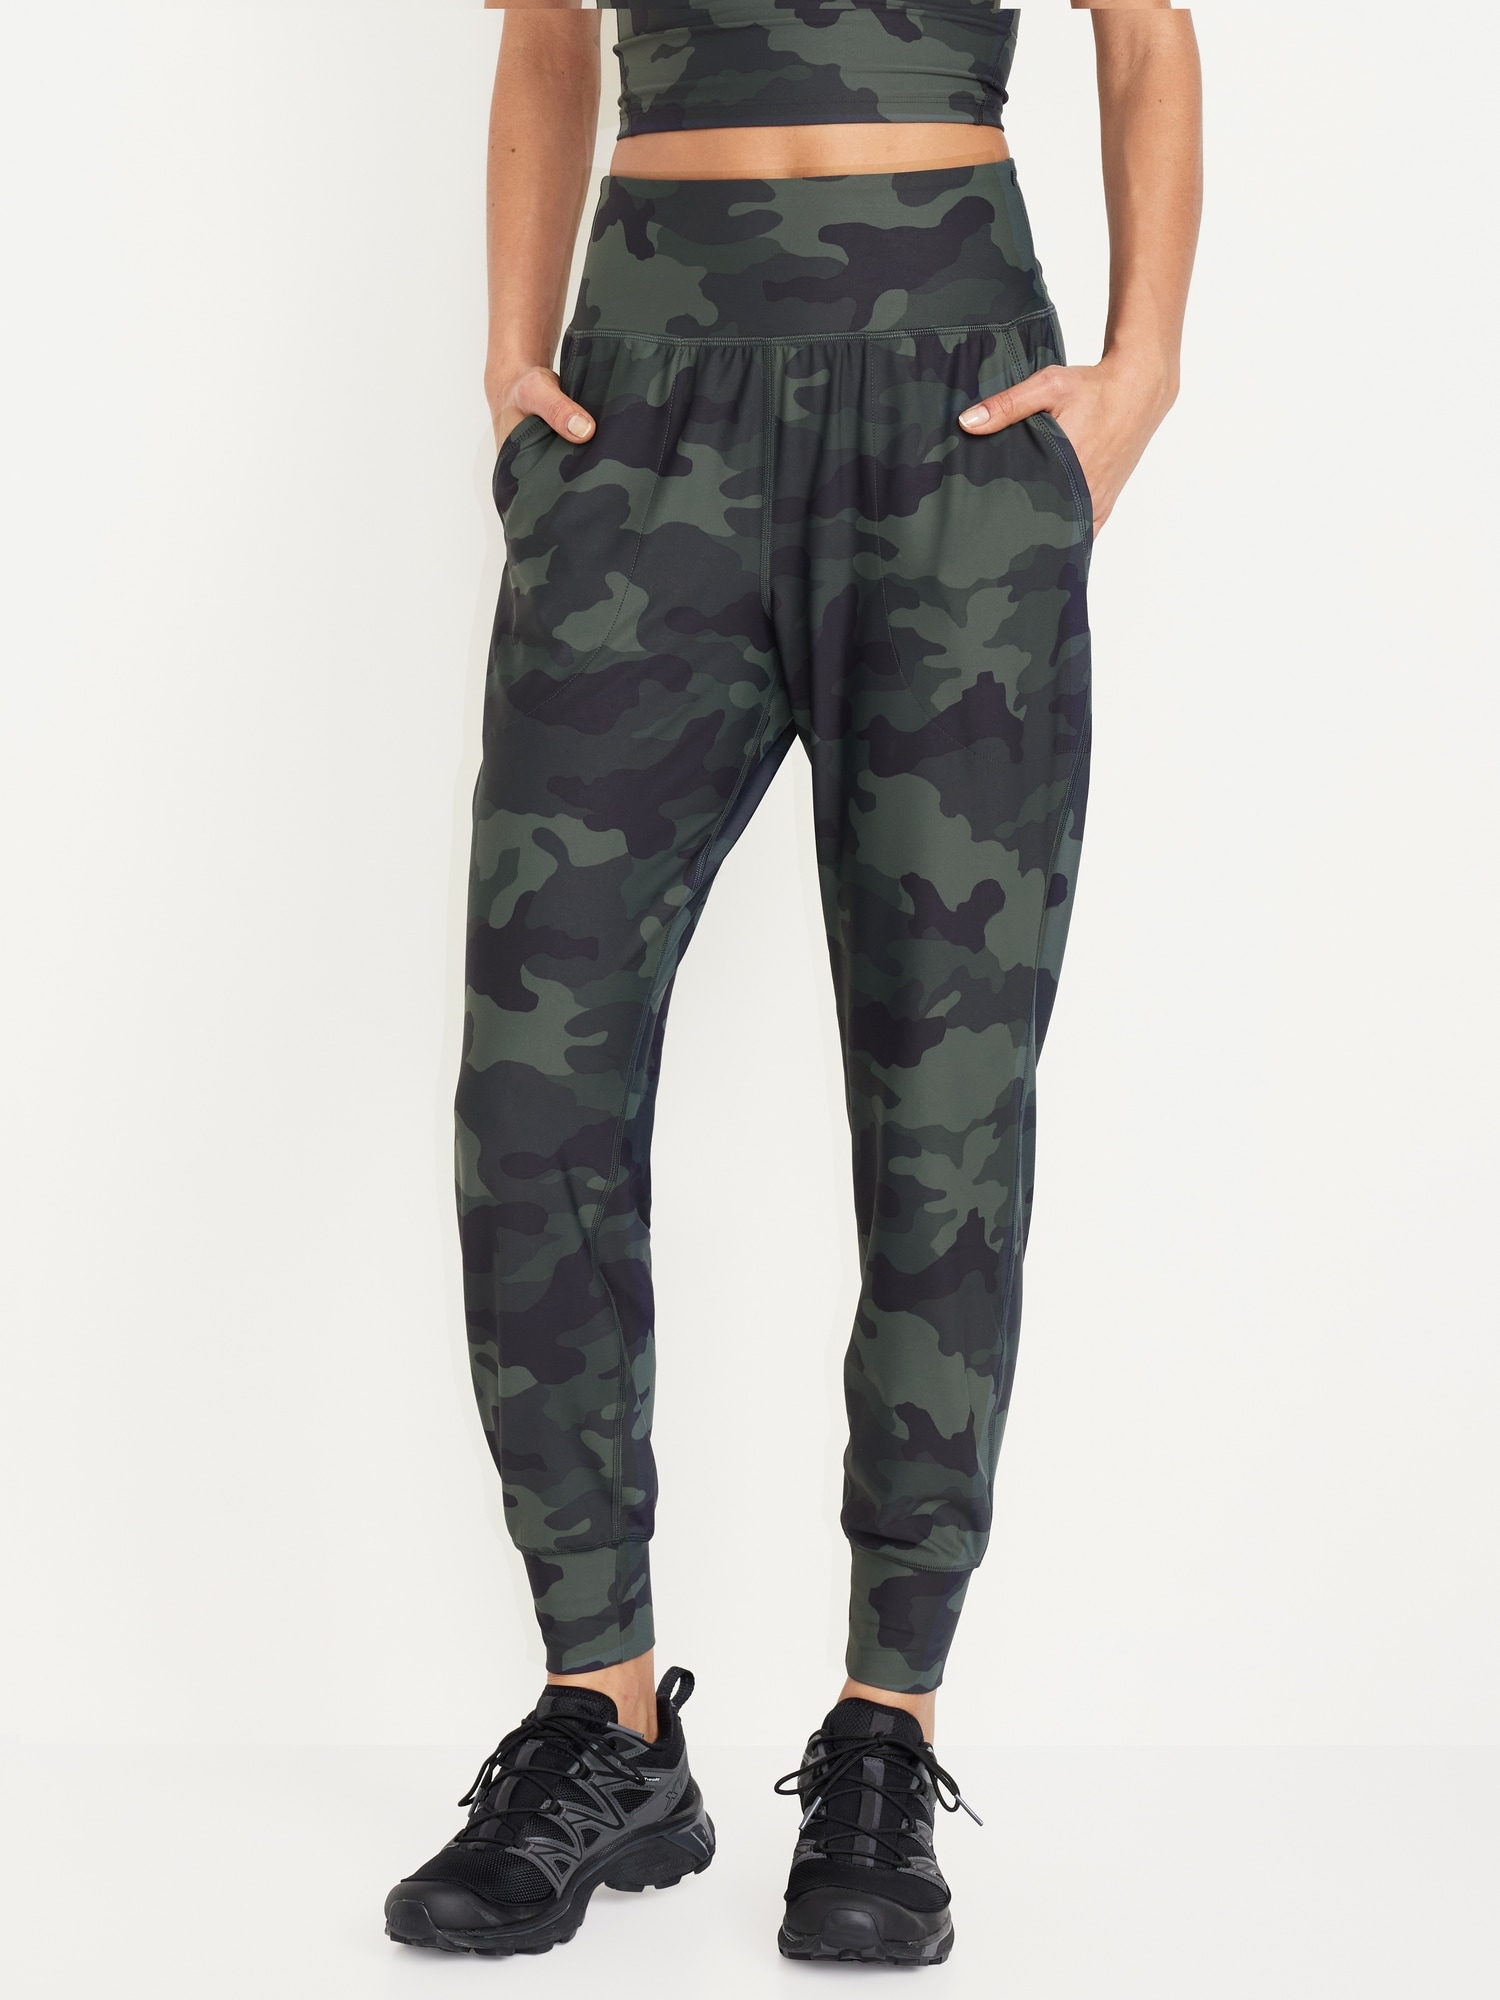 High-Waisted PowerSoft Slim Joggers for Women